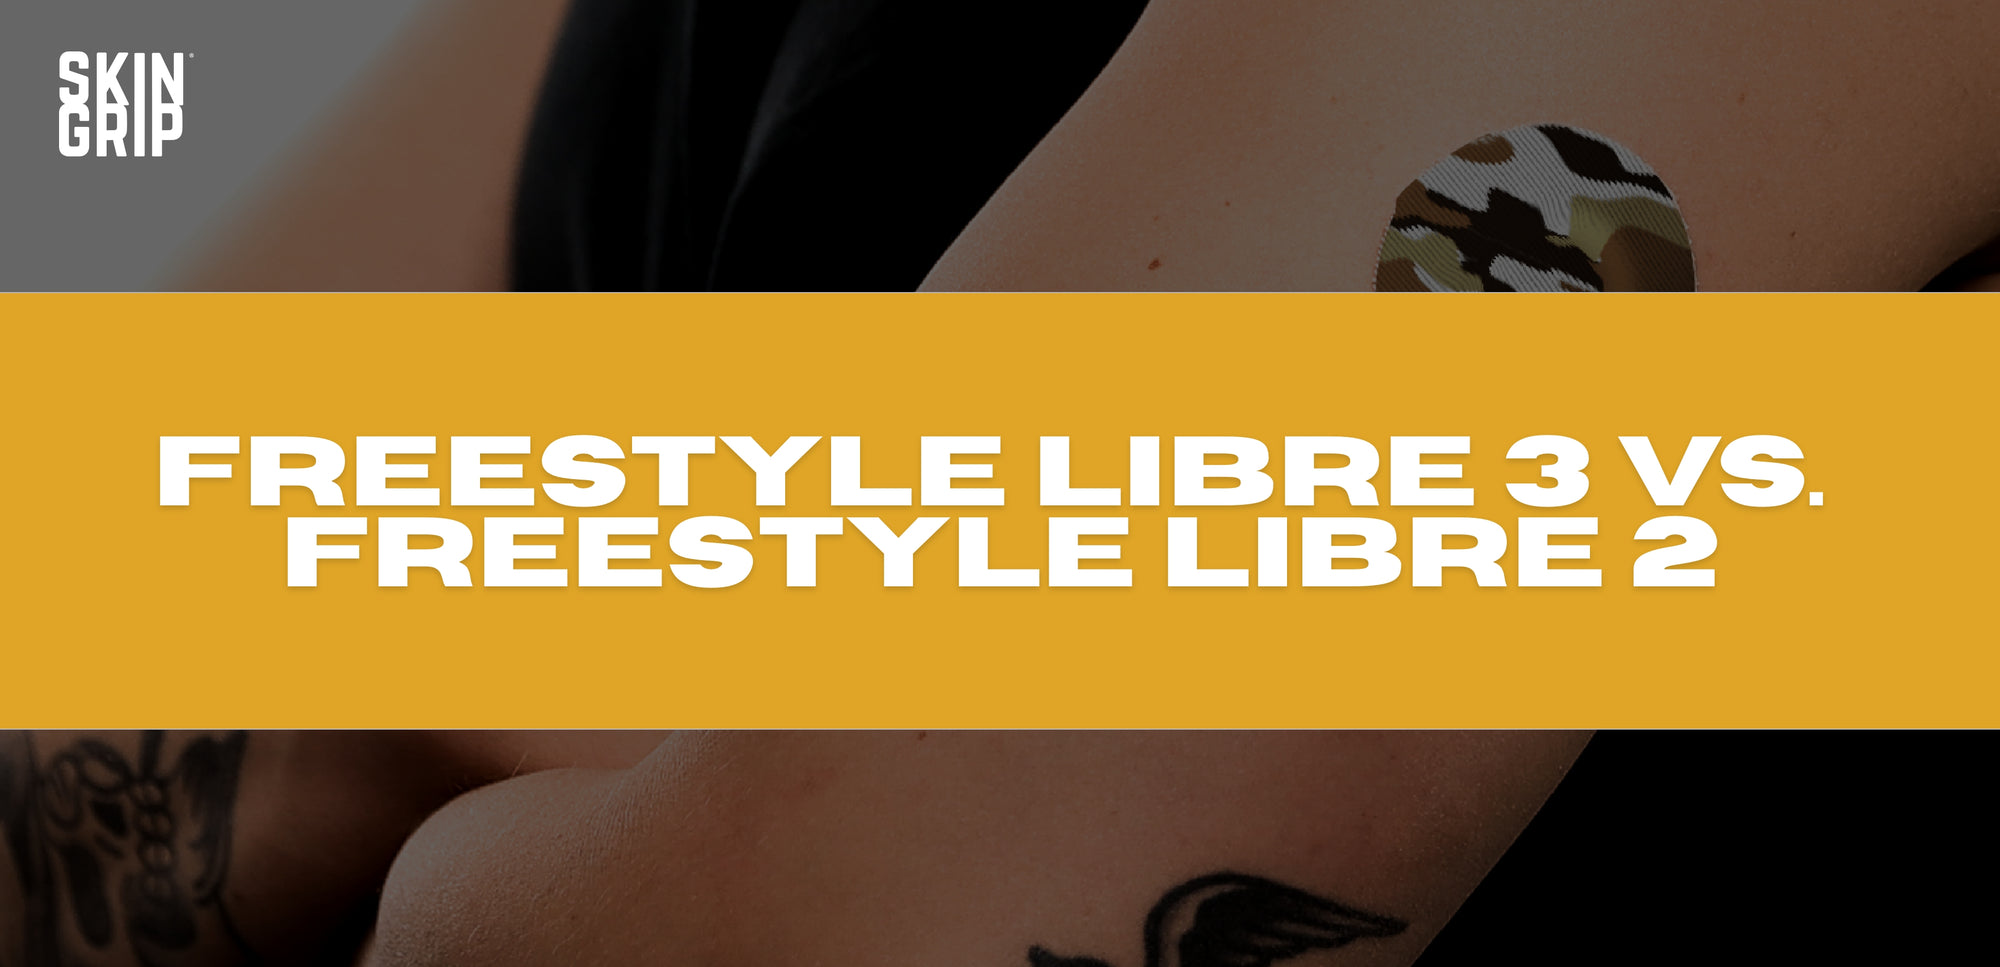 Freestyle Libre 3 vs Freestyle Libre 2: Which is Right for You?